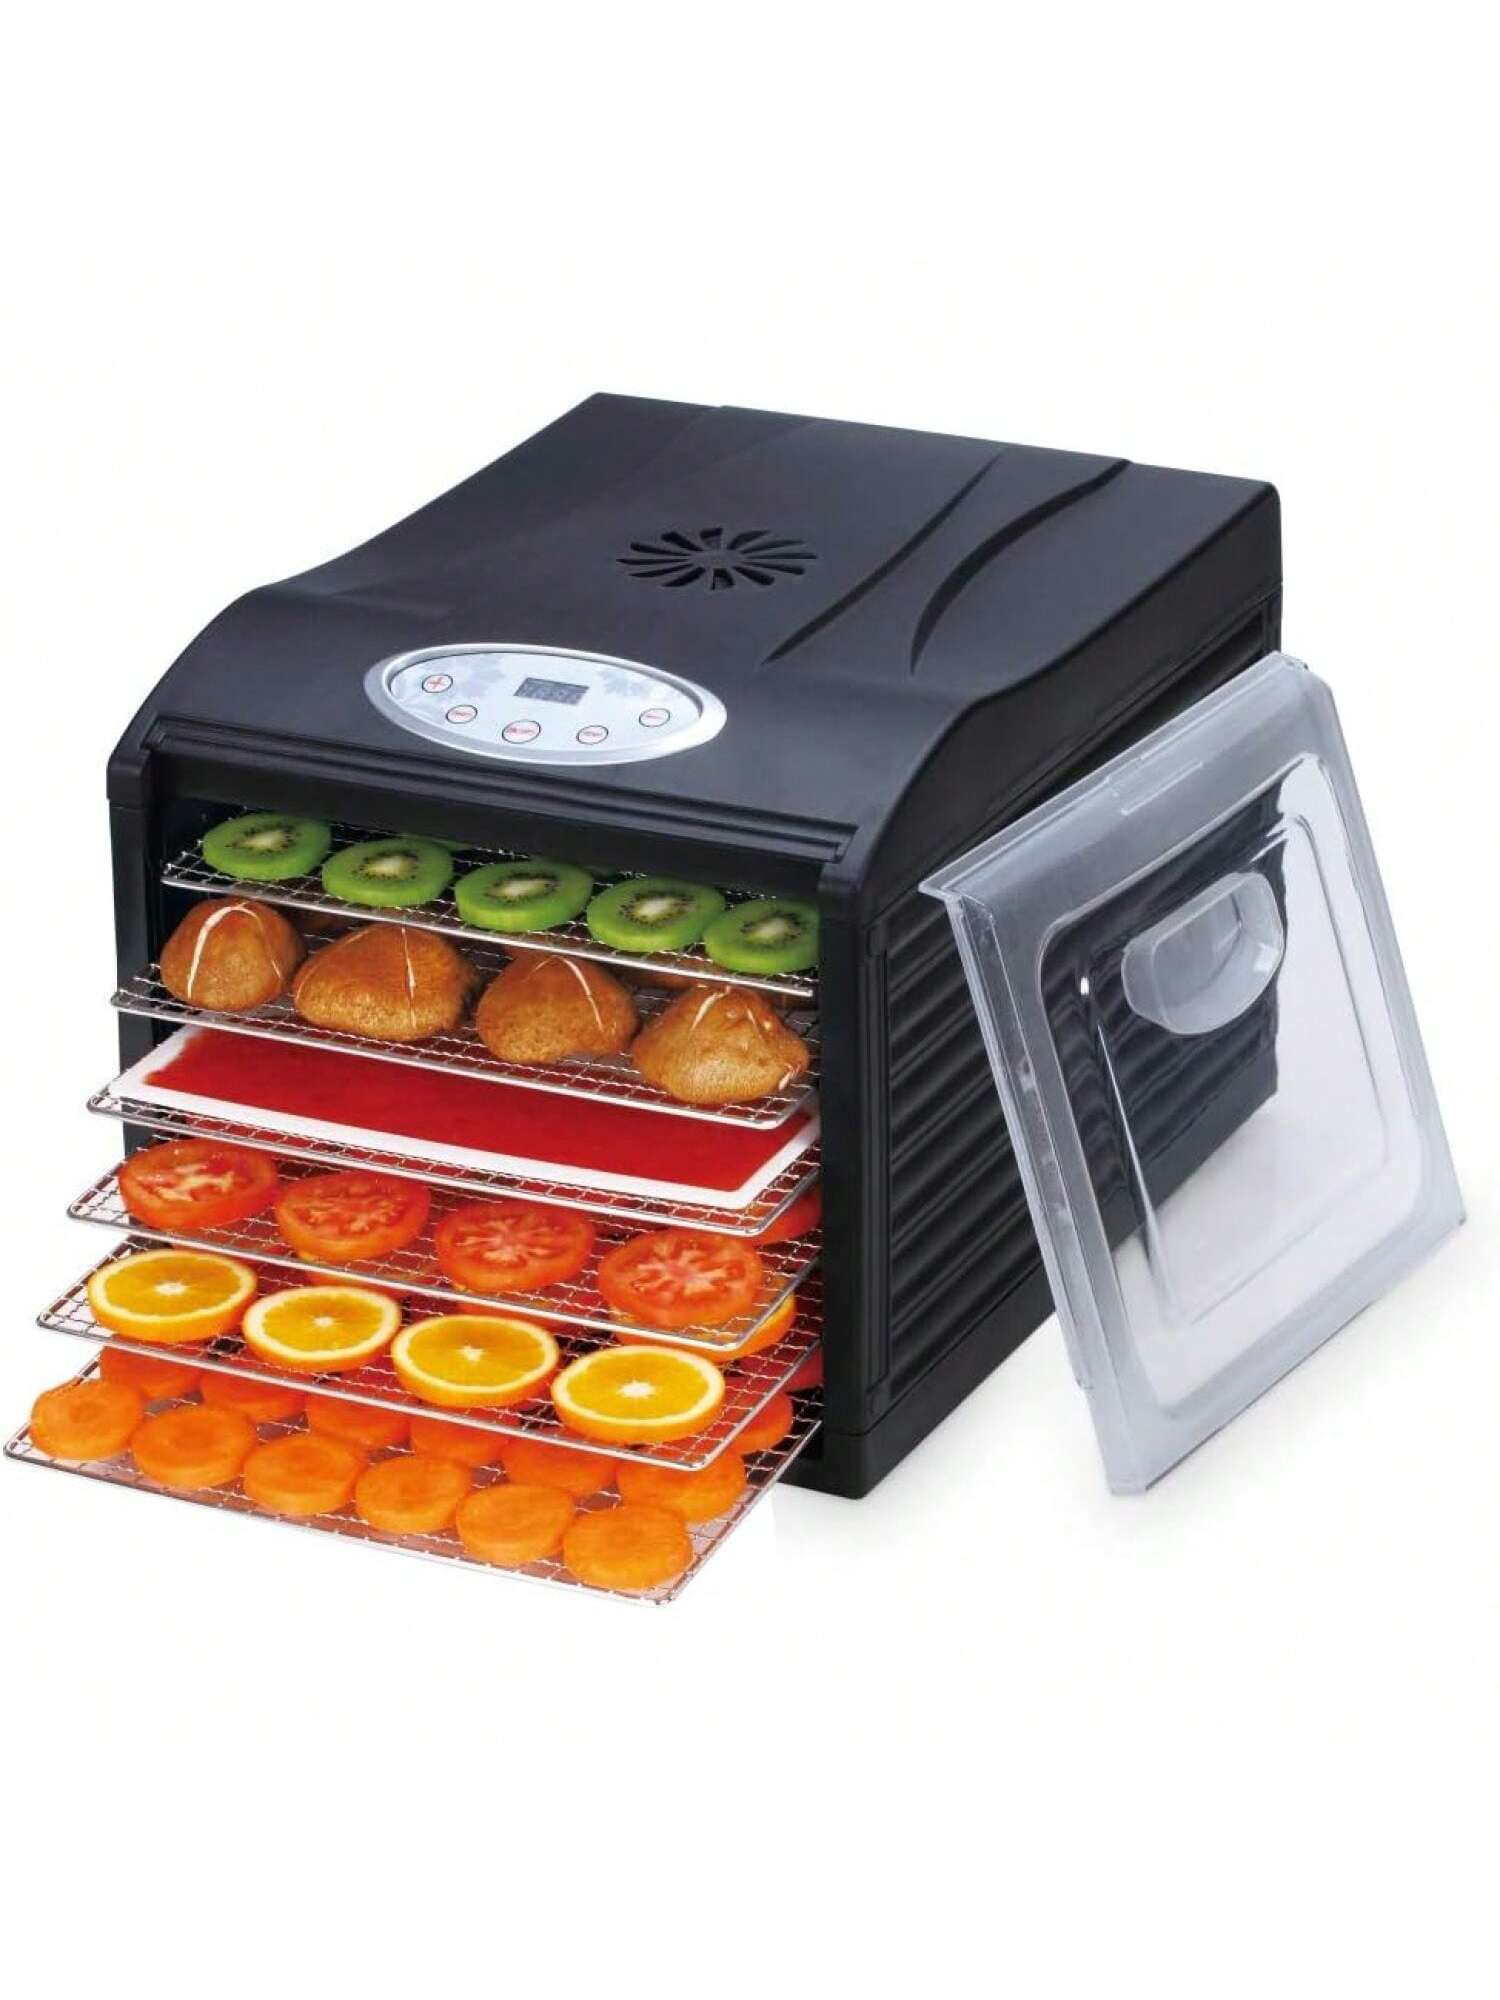 "Silent" Dehydrator with 6 STAINLESS STEEL Trays and Digital Timer and Temperature Control for Fruit, Vegetables, Jerky, s, Dog Treats, Fruit Leathers and More Quiet and Convenient PLUS 6 Silicone Sheets-Multicolor-1